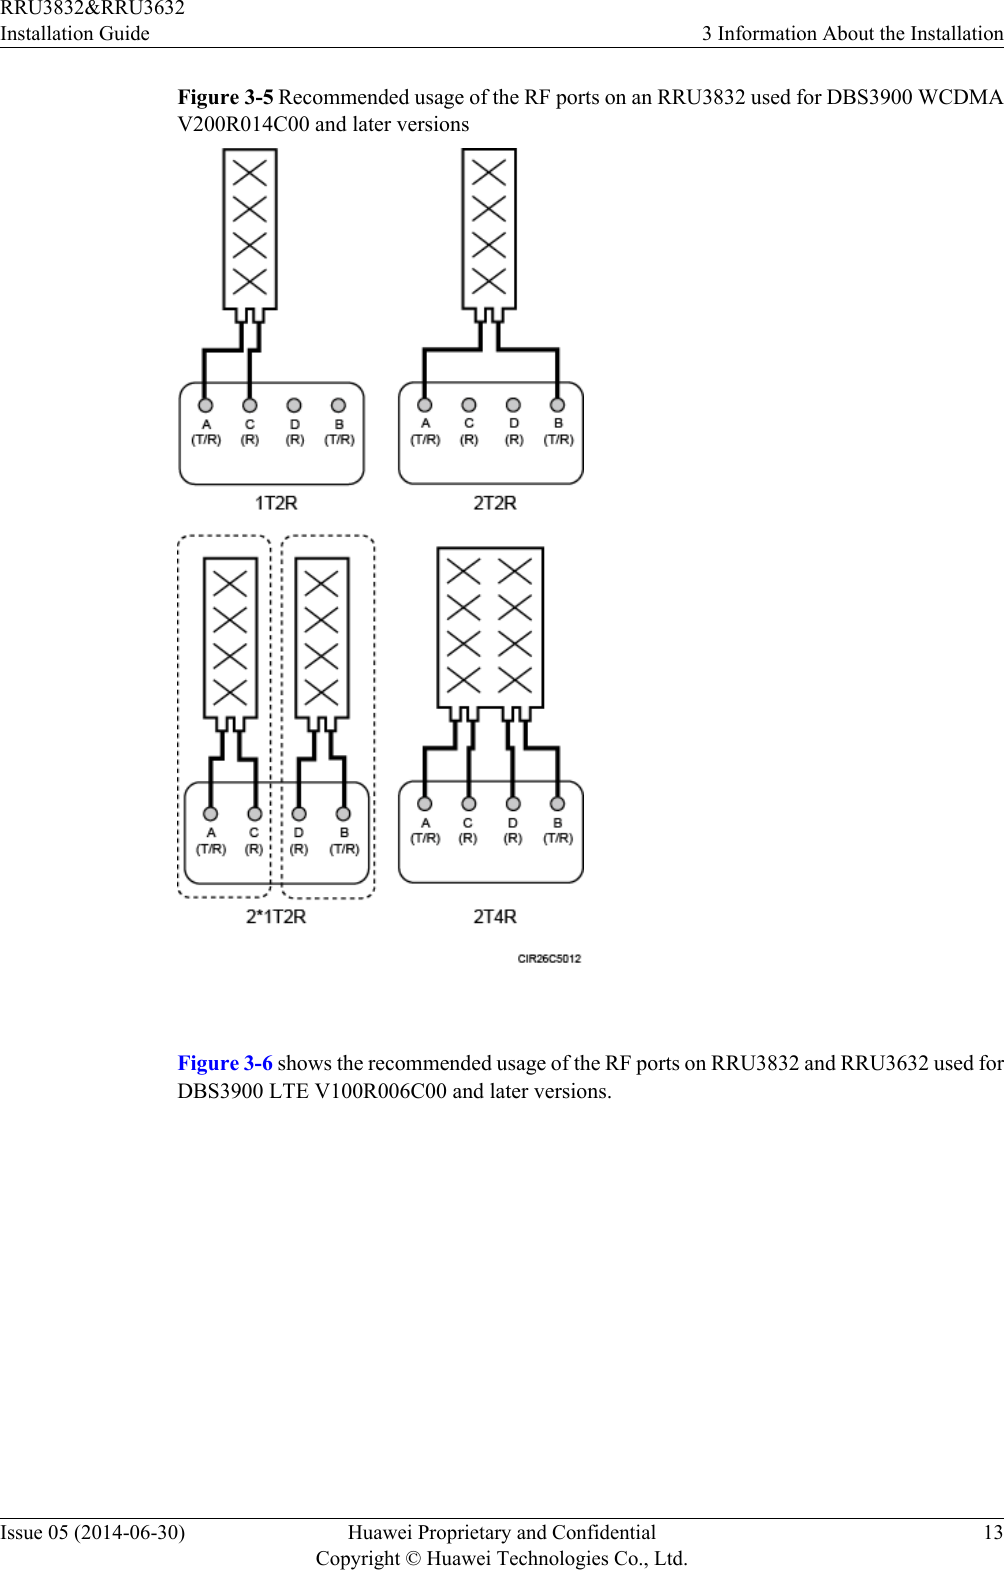 Figure 3-5 Recommended usage of the RF ports on an RRU3832 used for DBS3900 WCDMAV200R014C00 and later versions Figure 3-6 shows the recommended usage of the RF ports on RRU3832 and RRU3632 used forDBS3900 LTE V100R006C00 and later versions.RRU3832&amp;RRU3632Installation Guide 3 Information About the InstallationIssue 05 (2014-06-30) Huawei Proprietary and ConfidentialCopyright © Huawei Technologies Co., Ltd.13